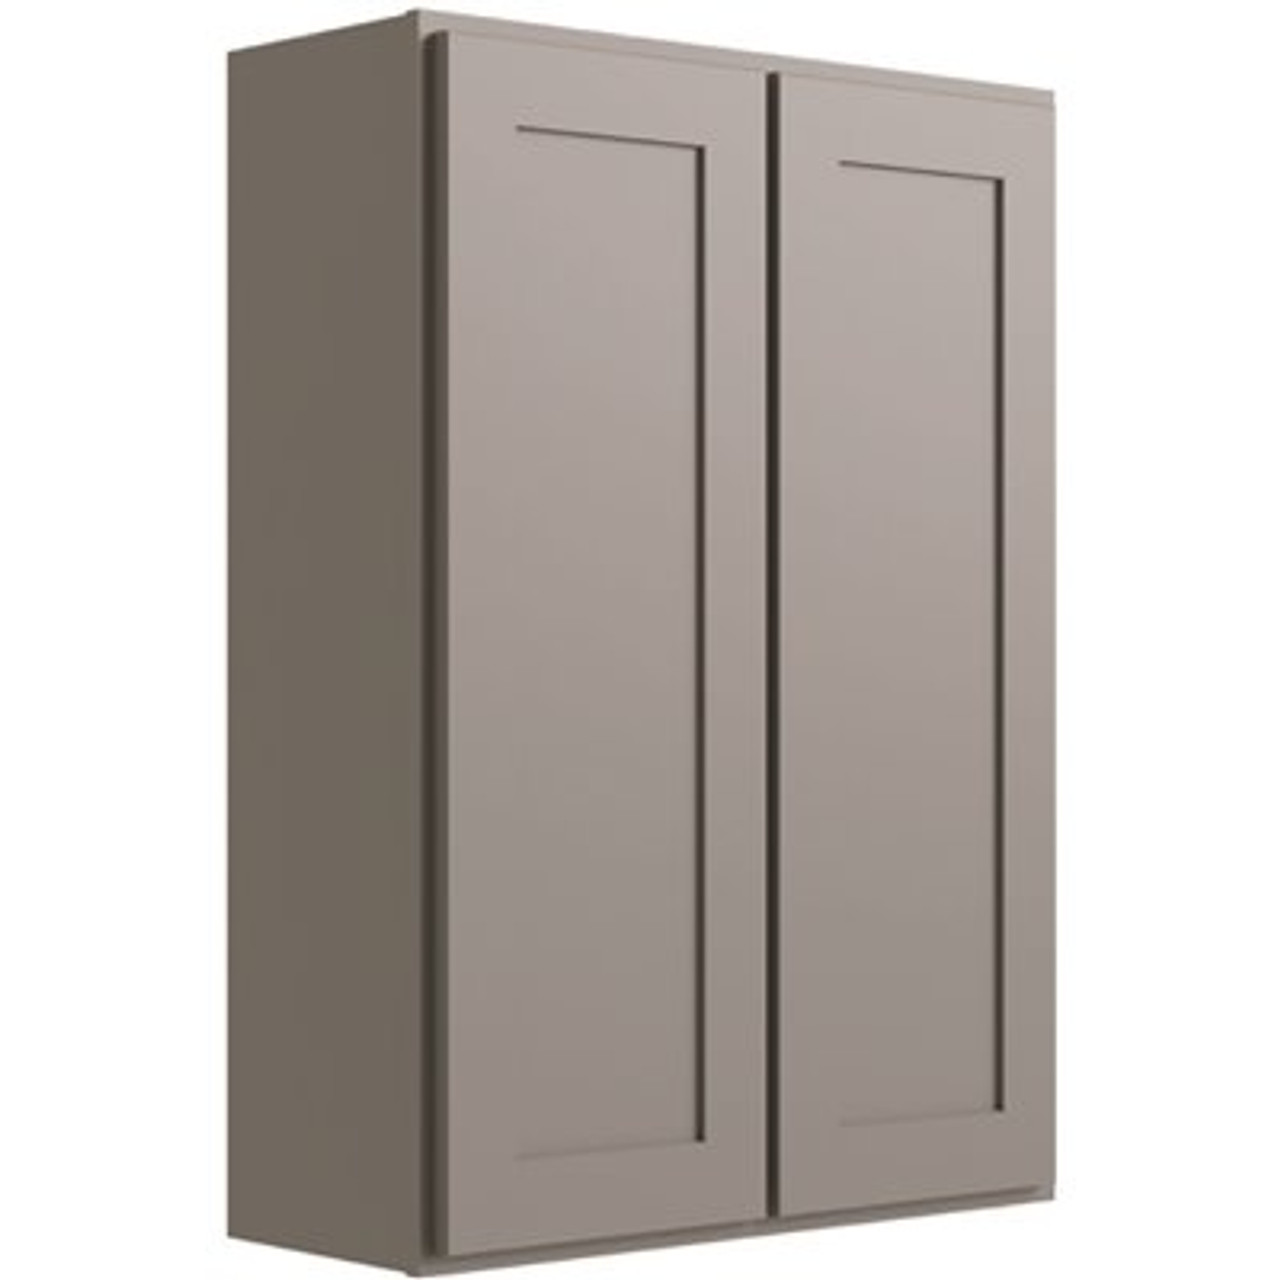 CNC Cabinetry Luxor 2-Door Wall Cabinet, 36"w X 42"h X 12"d, Shaker Misty Grey